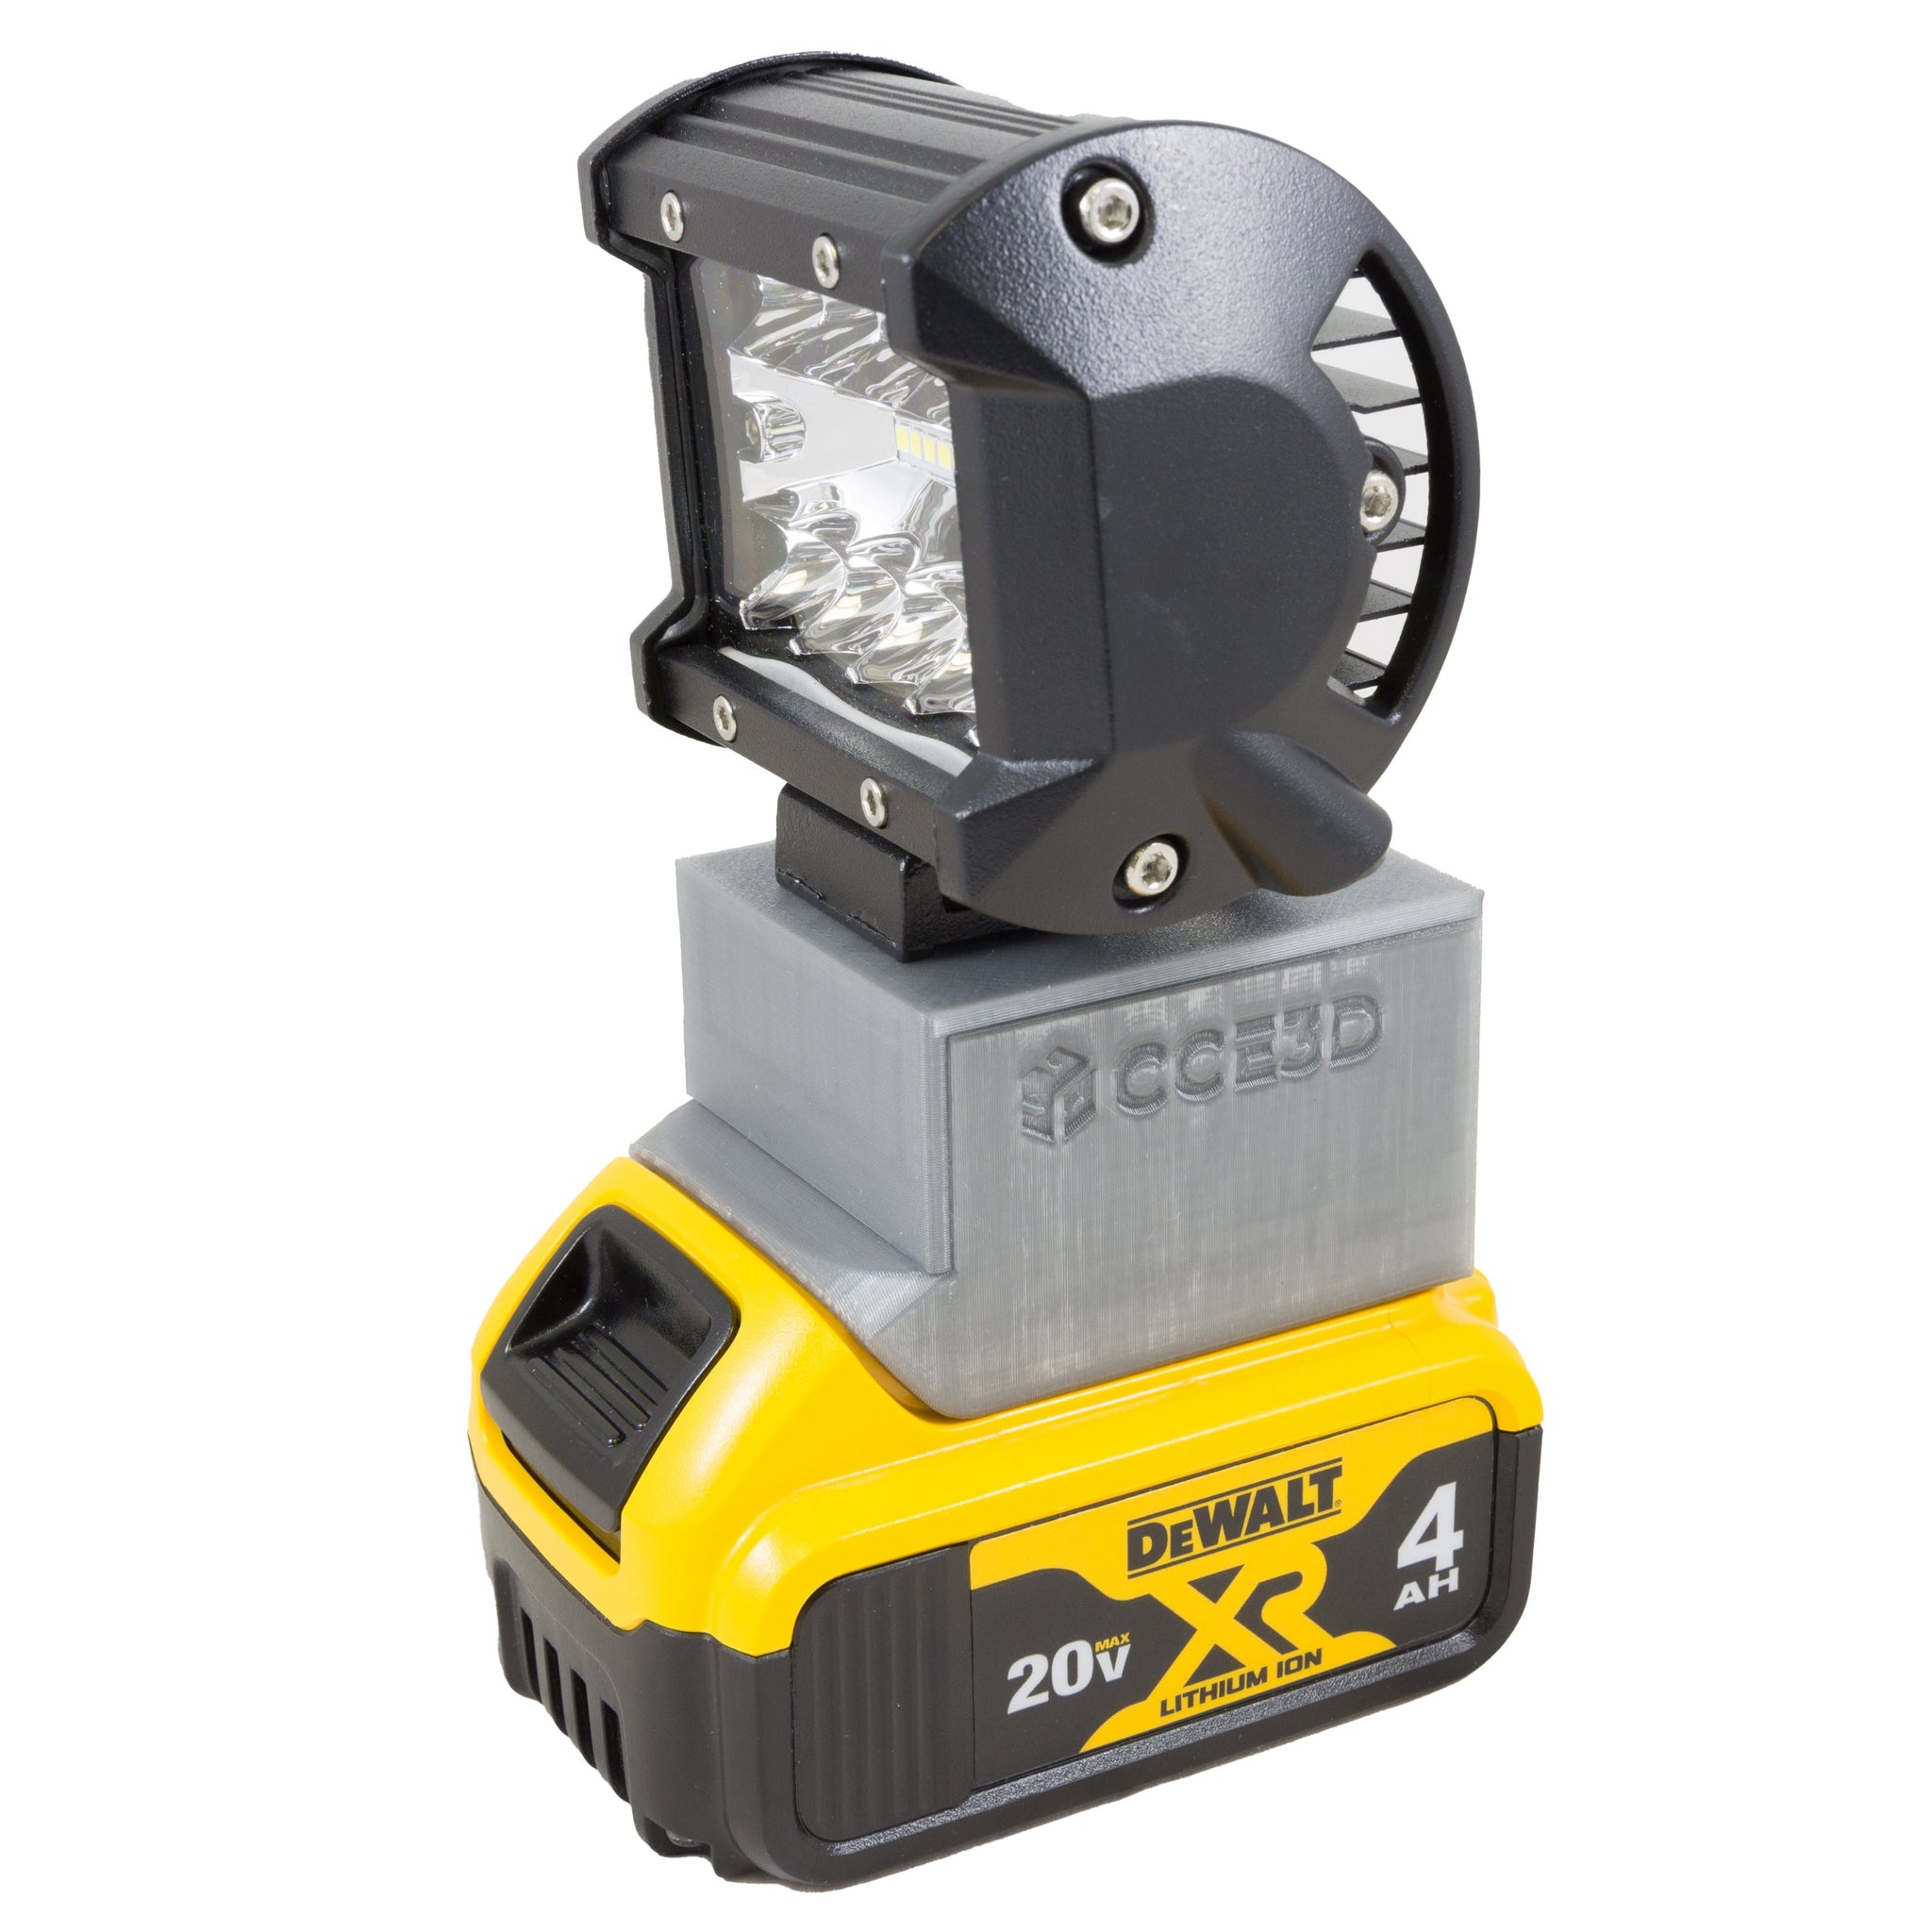 How to Choose a Led Work Light